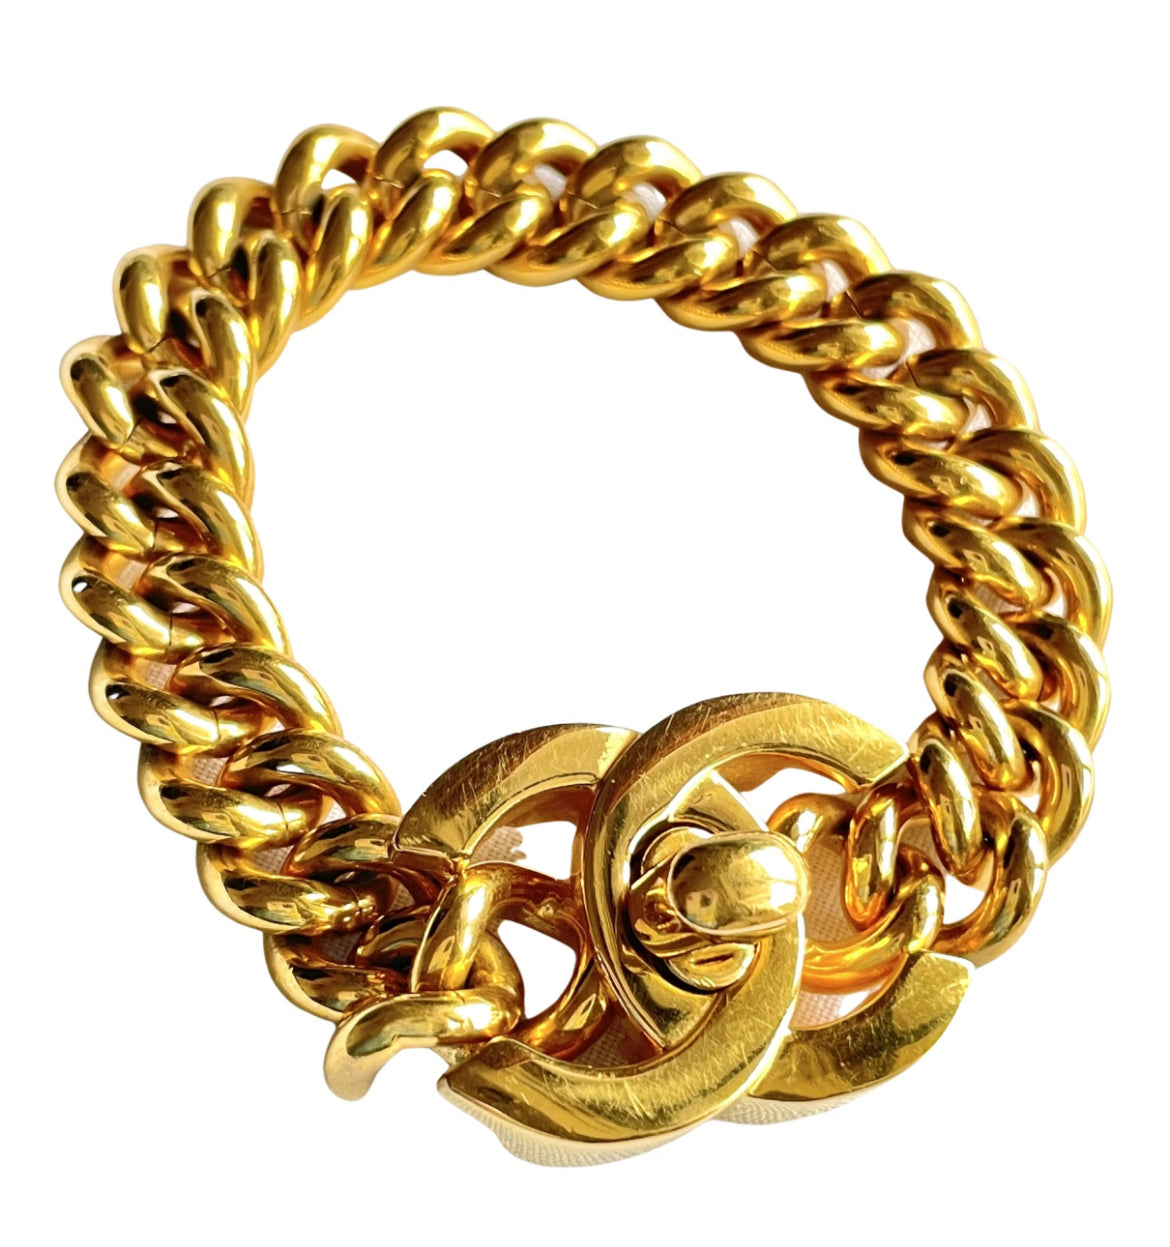 Vintage Chanel turn lock CC chain bracelet. Must have 90s jewelry